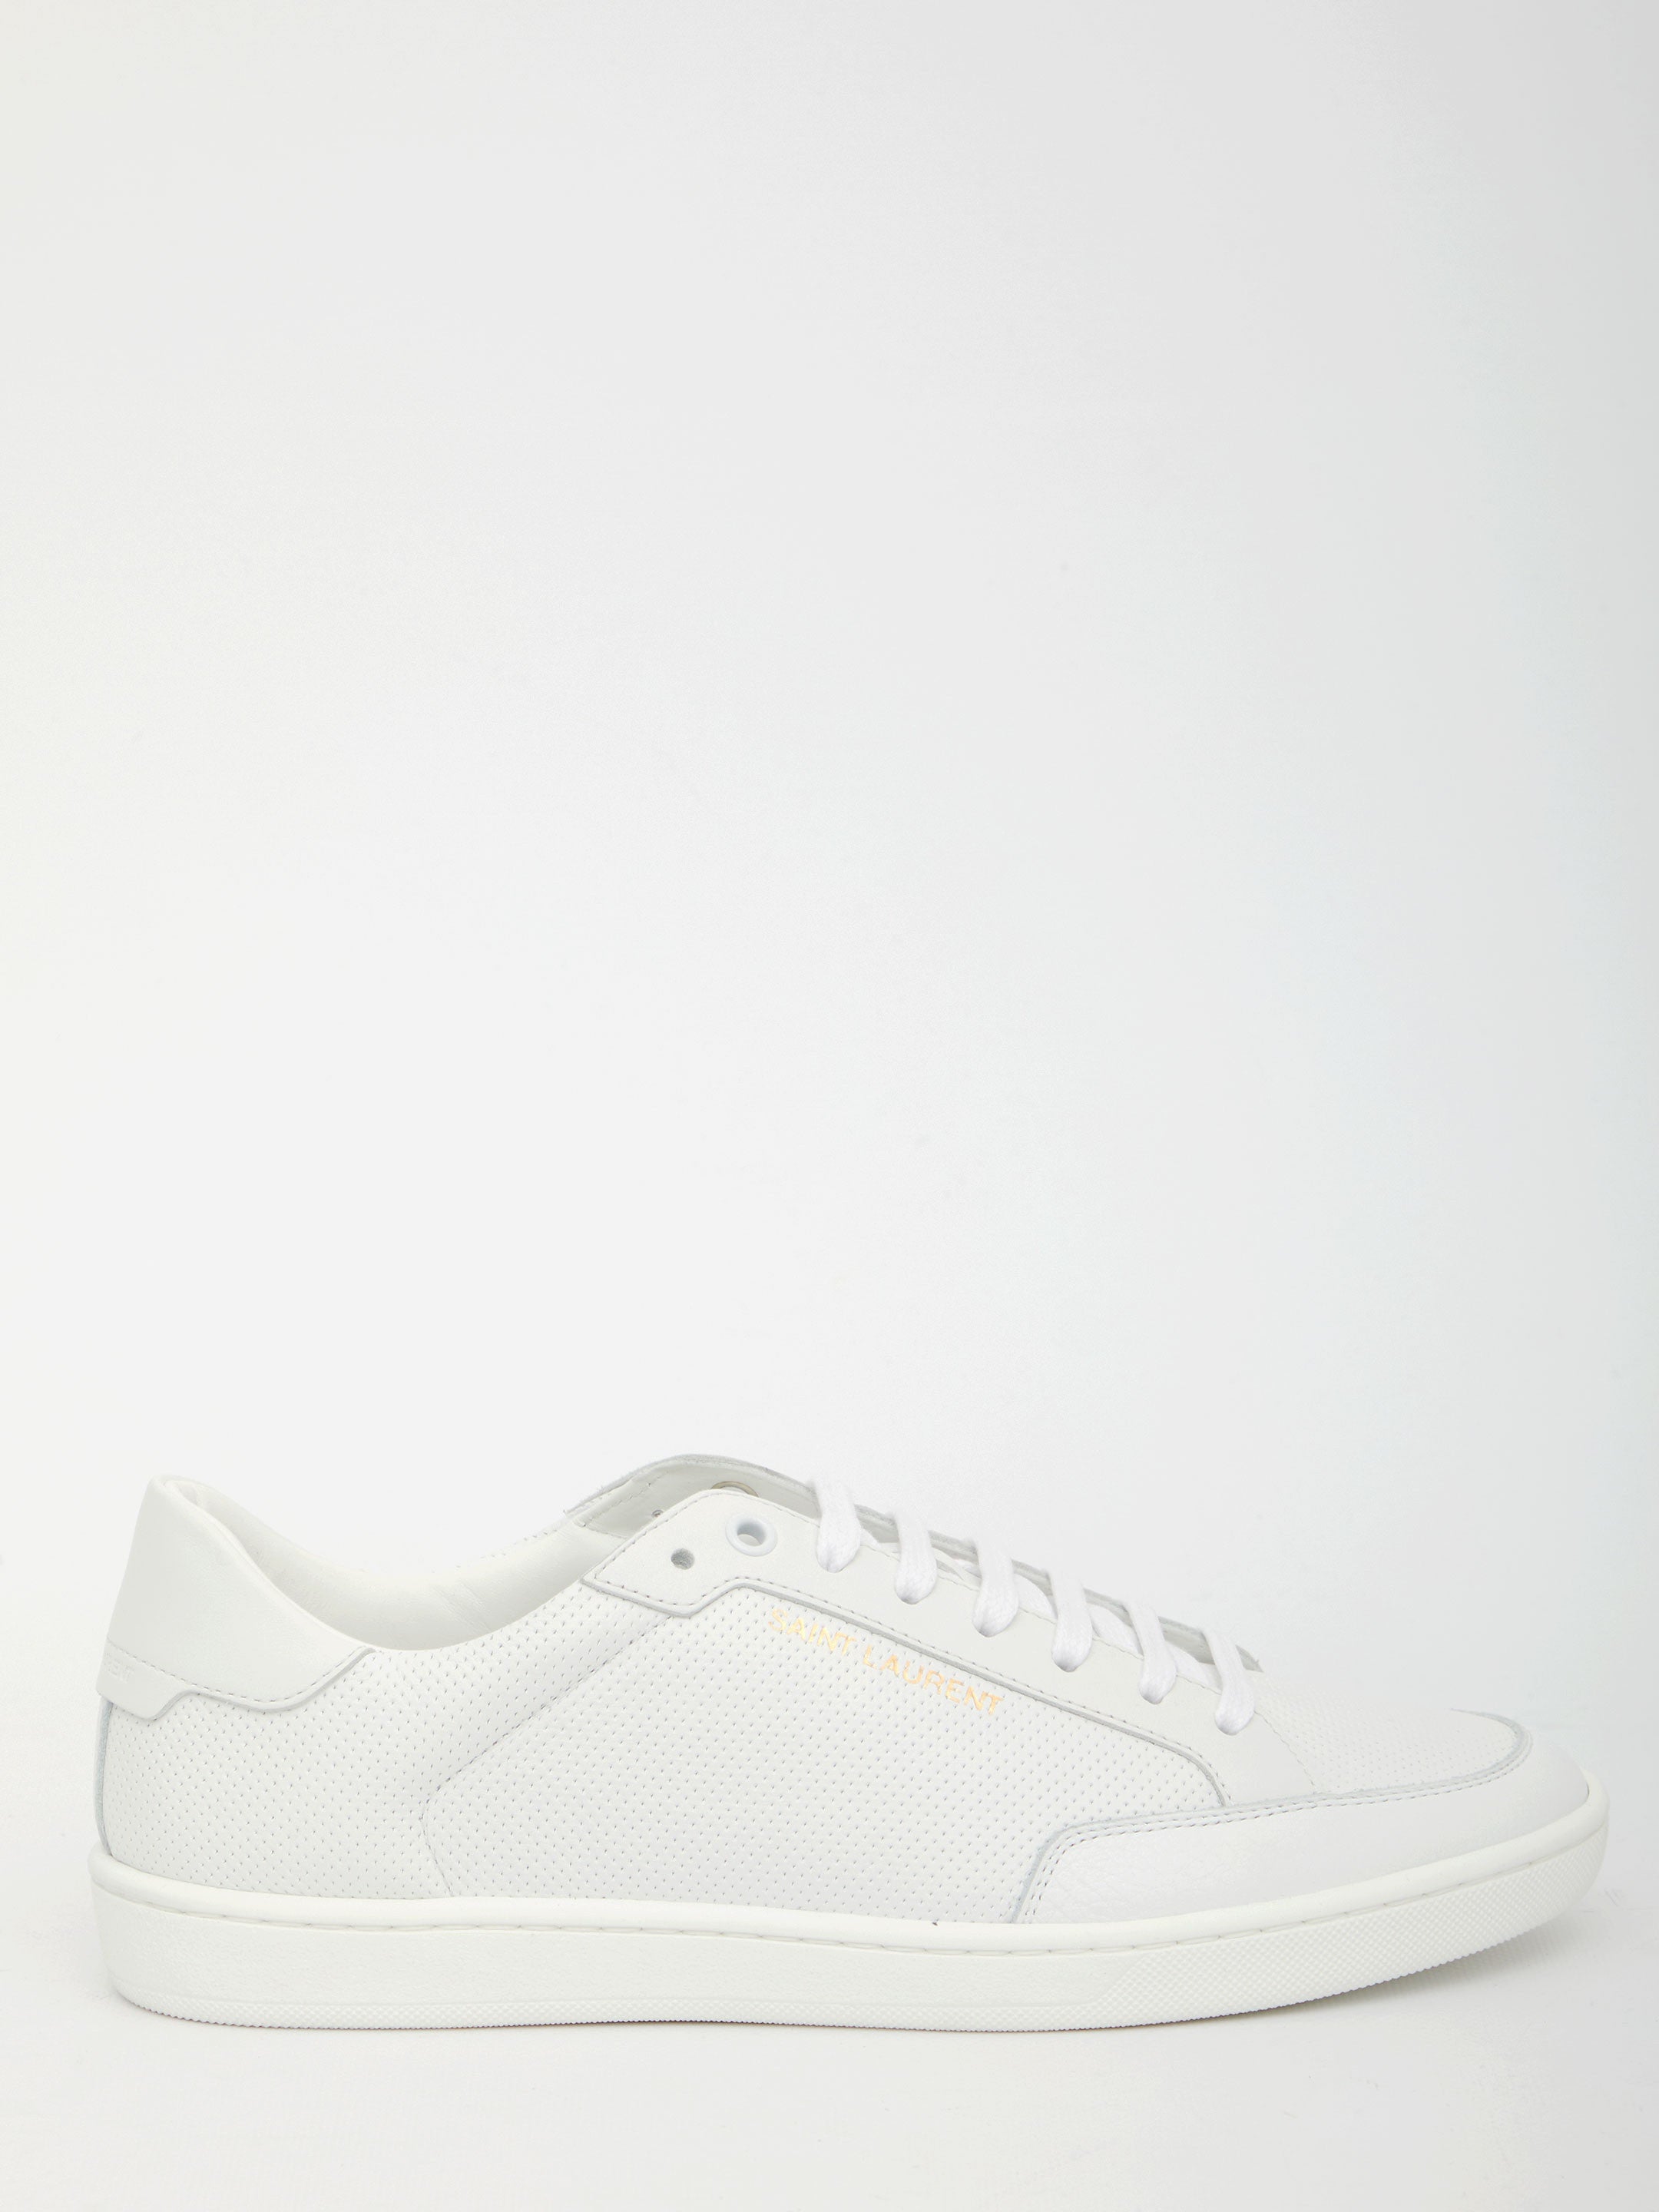 SAINT-LAURENT-OUTLET-SALE-Court-Classic-SL10-sneakers-Sneakers-40-WHITE-ARCHIVE-COLLECTION.jpg